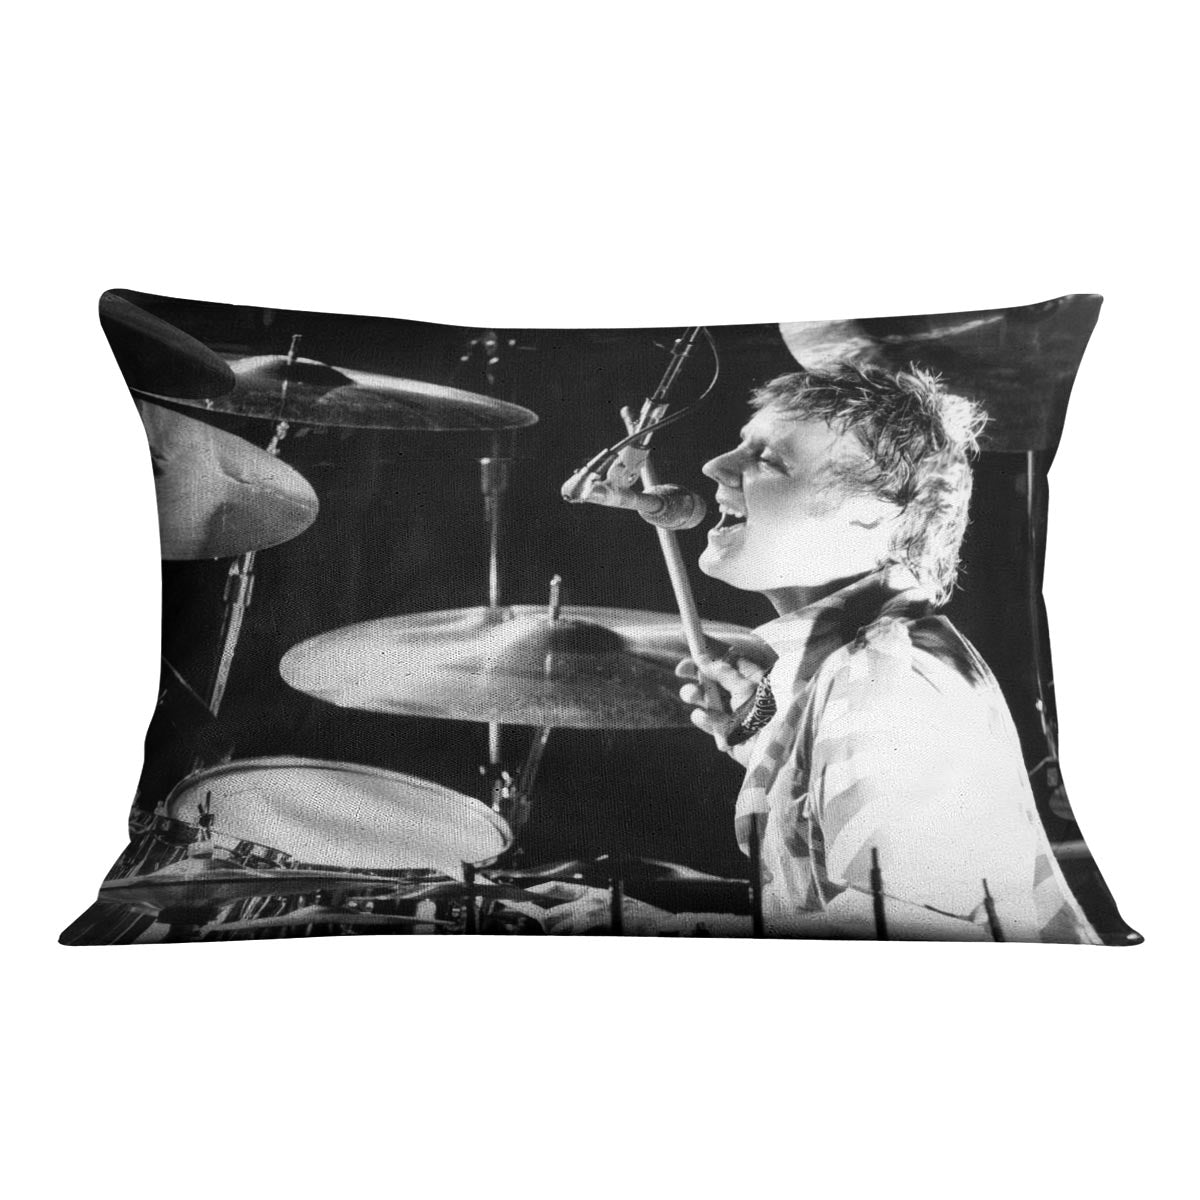 Queen Drummer Roger Taylor on stage Cushion